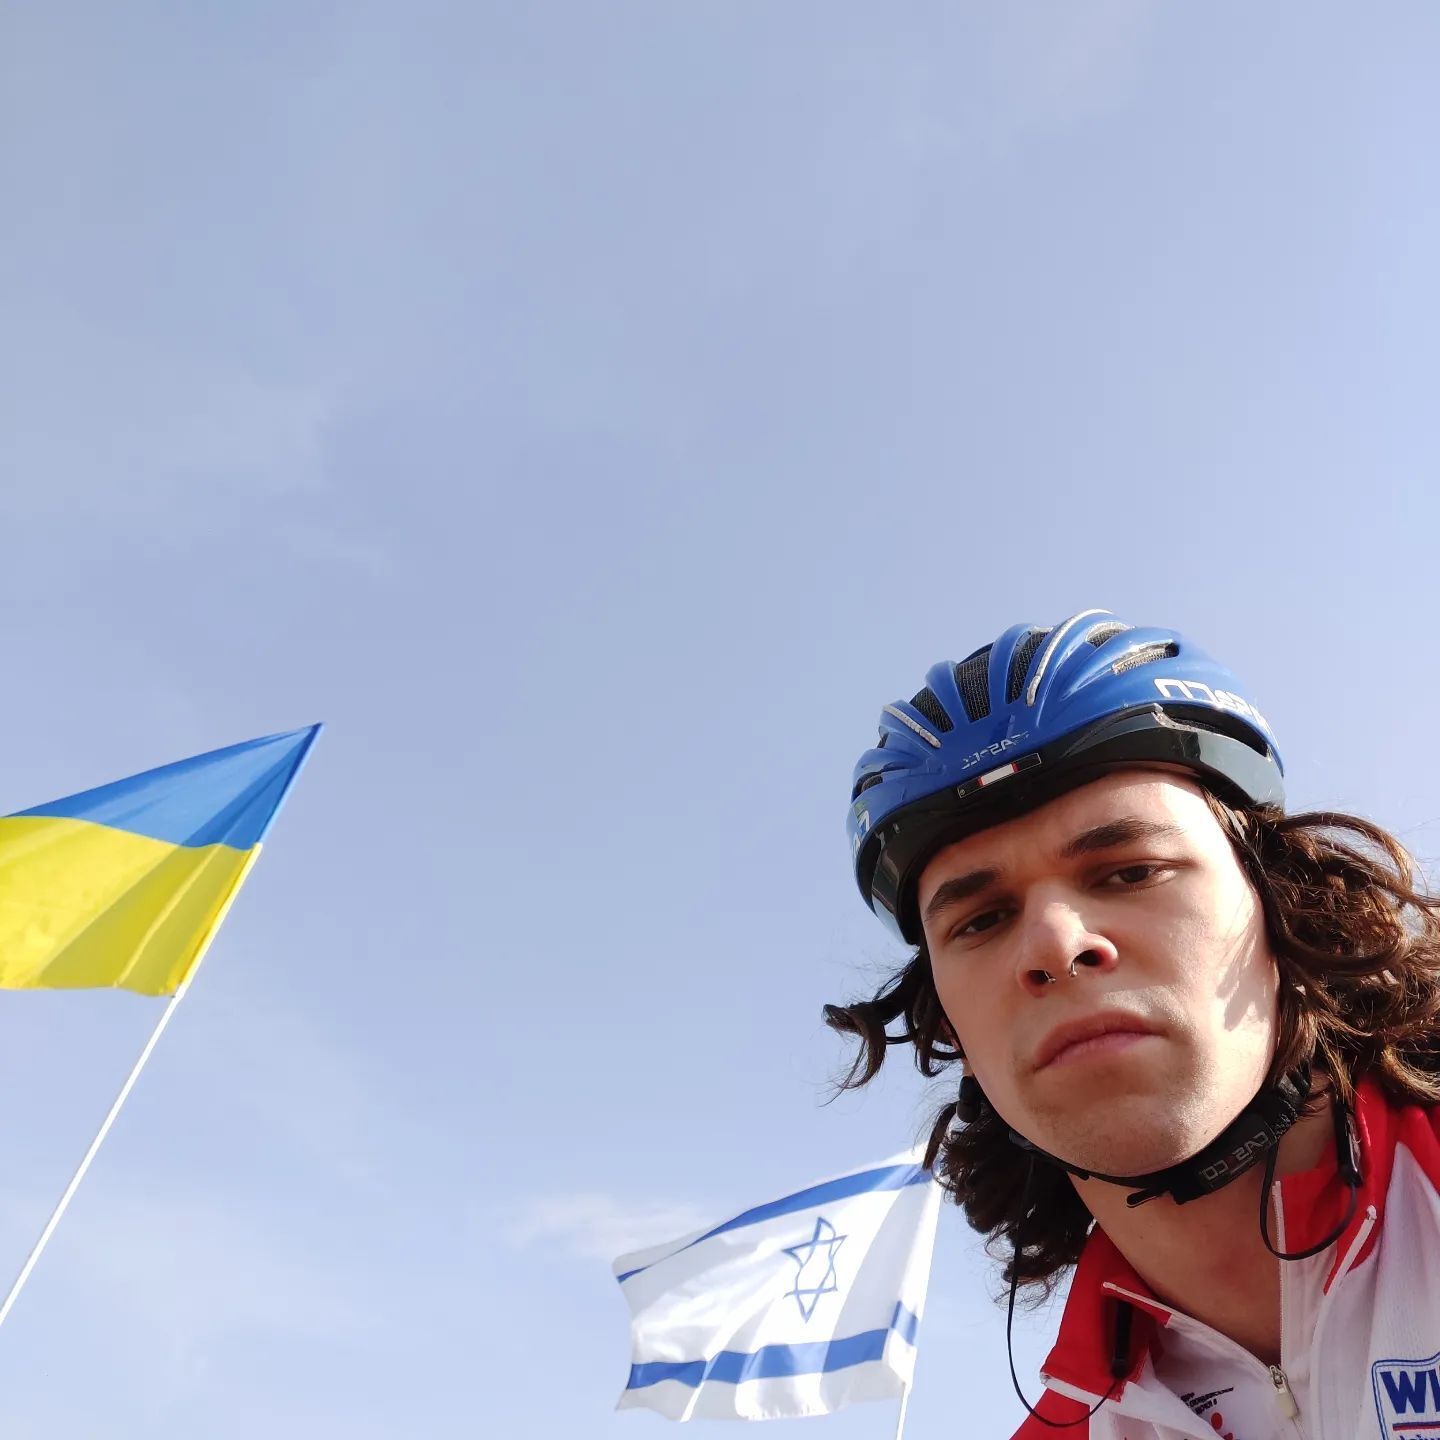 The IOC disrespected Russia by allowing a world record holder from Moscow who supported Ukraine to attend the Olympics